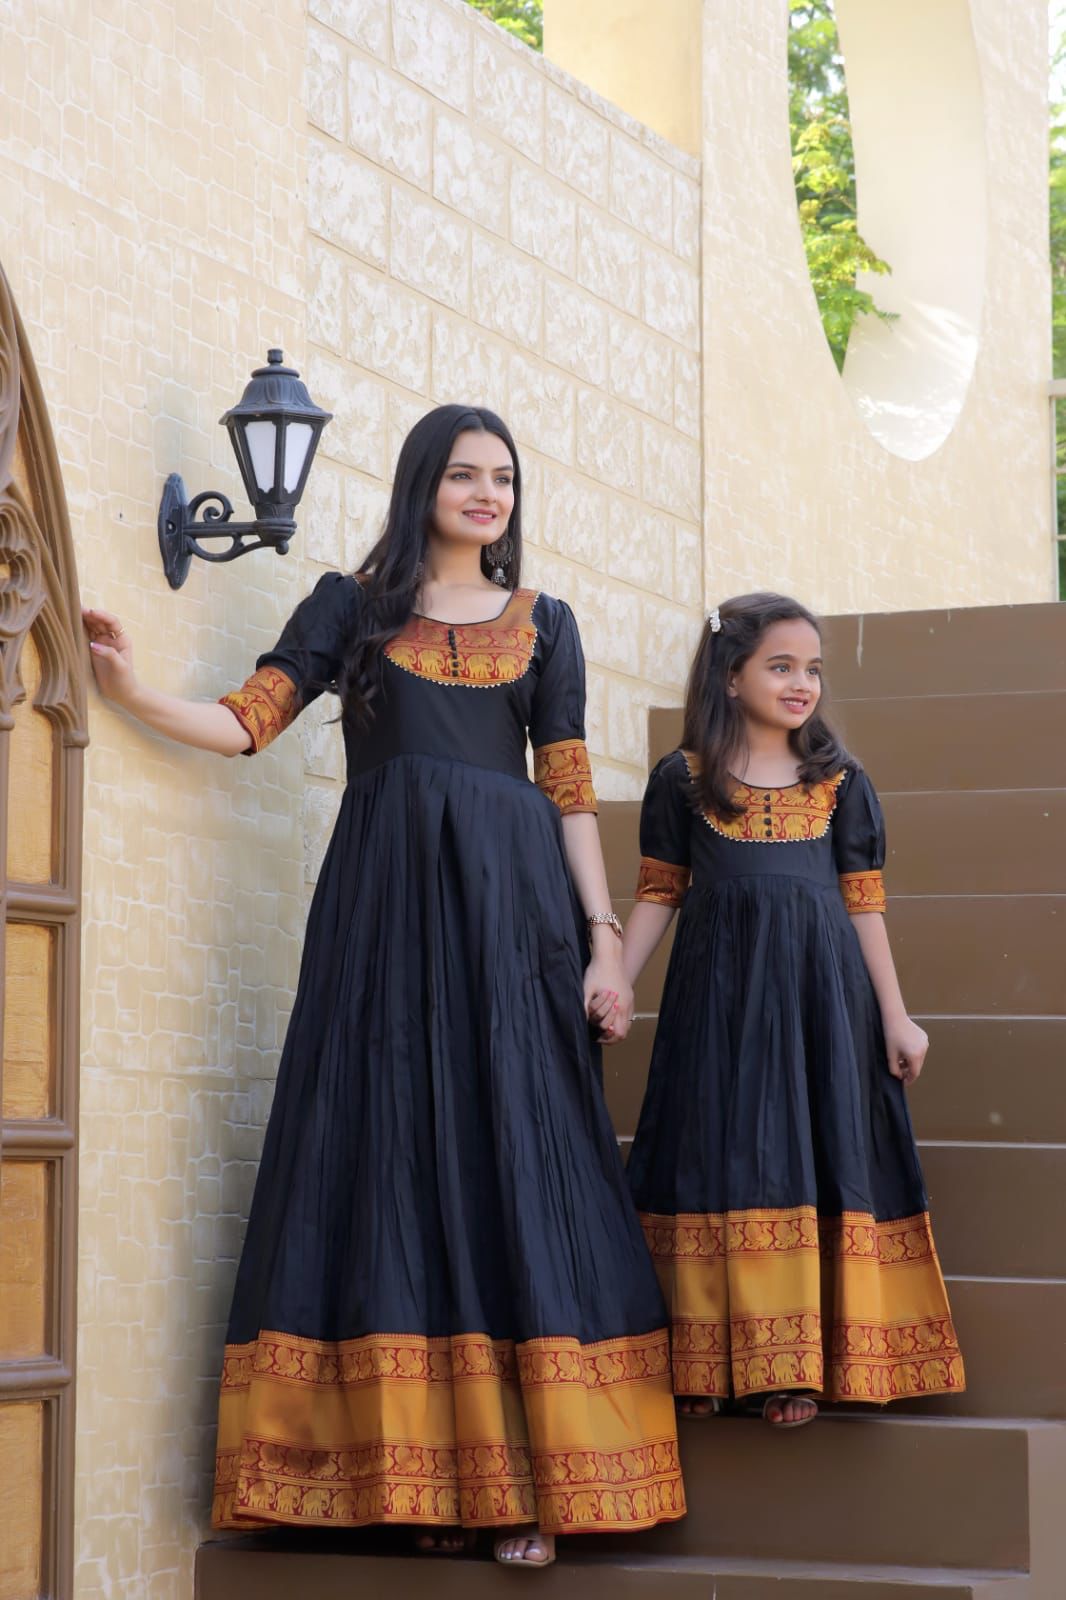 Premium Designer Etnic Wear Mom and Daughter Same Matching Gown Collection mahezon